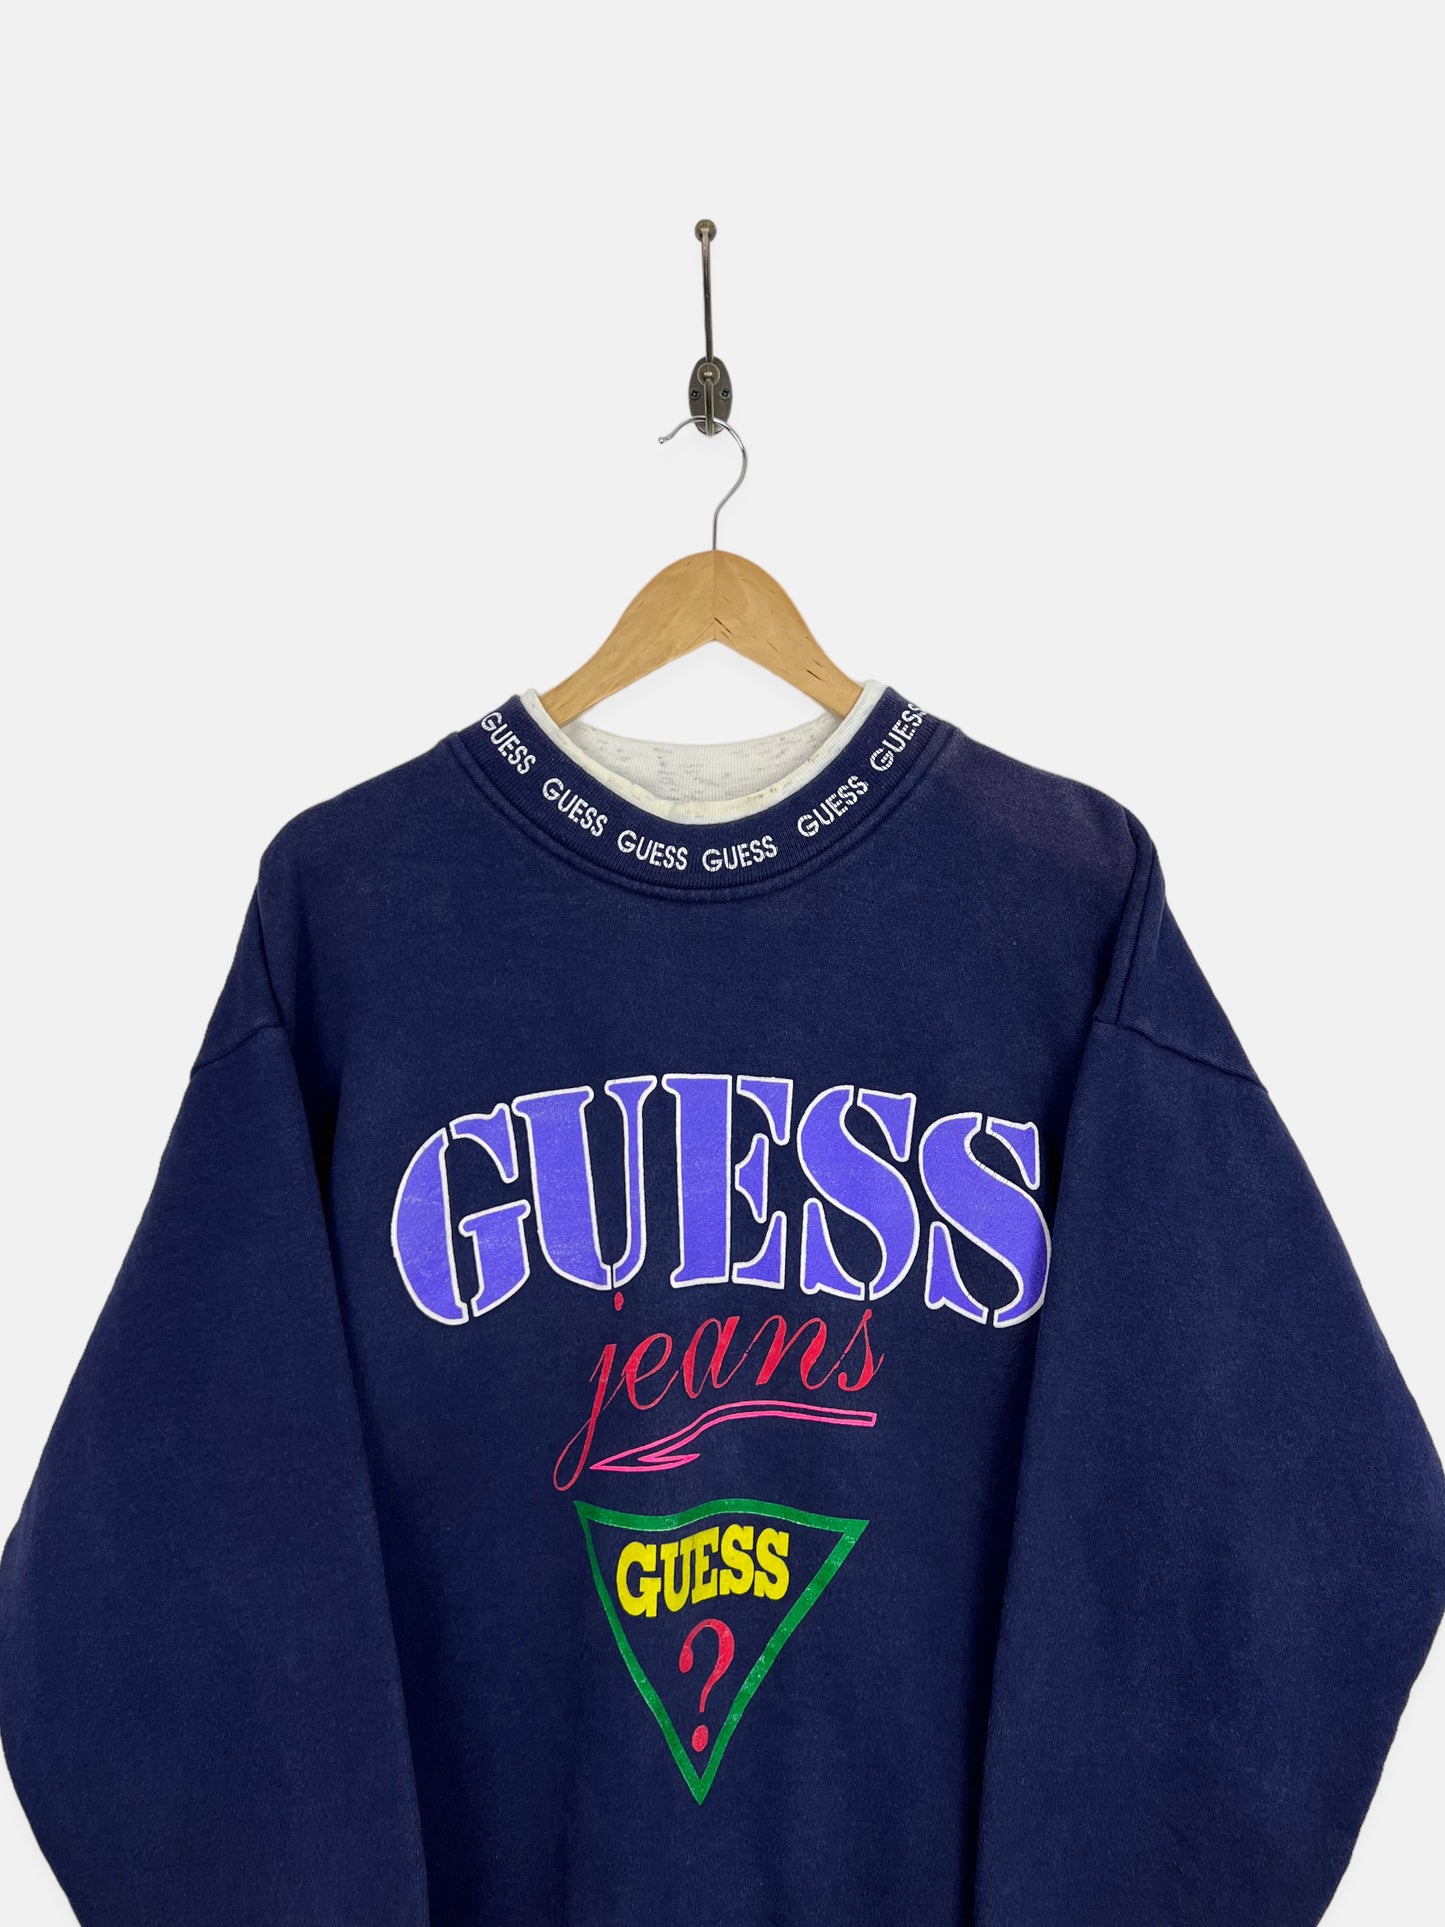 90's Guess Jeans USA Made Vintage High Neck Sweatshirt Size 12